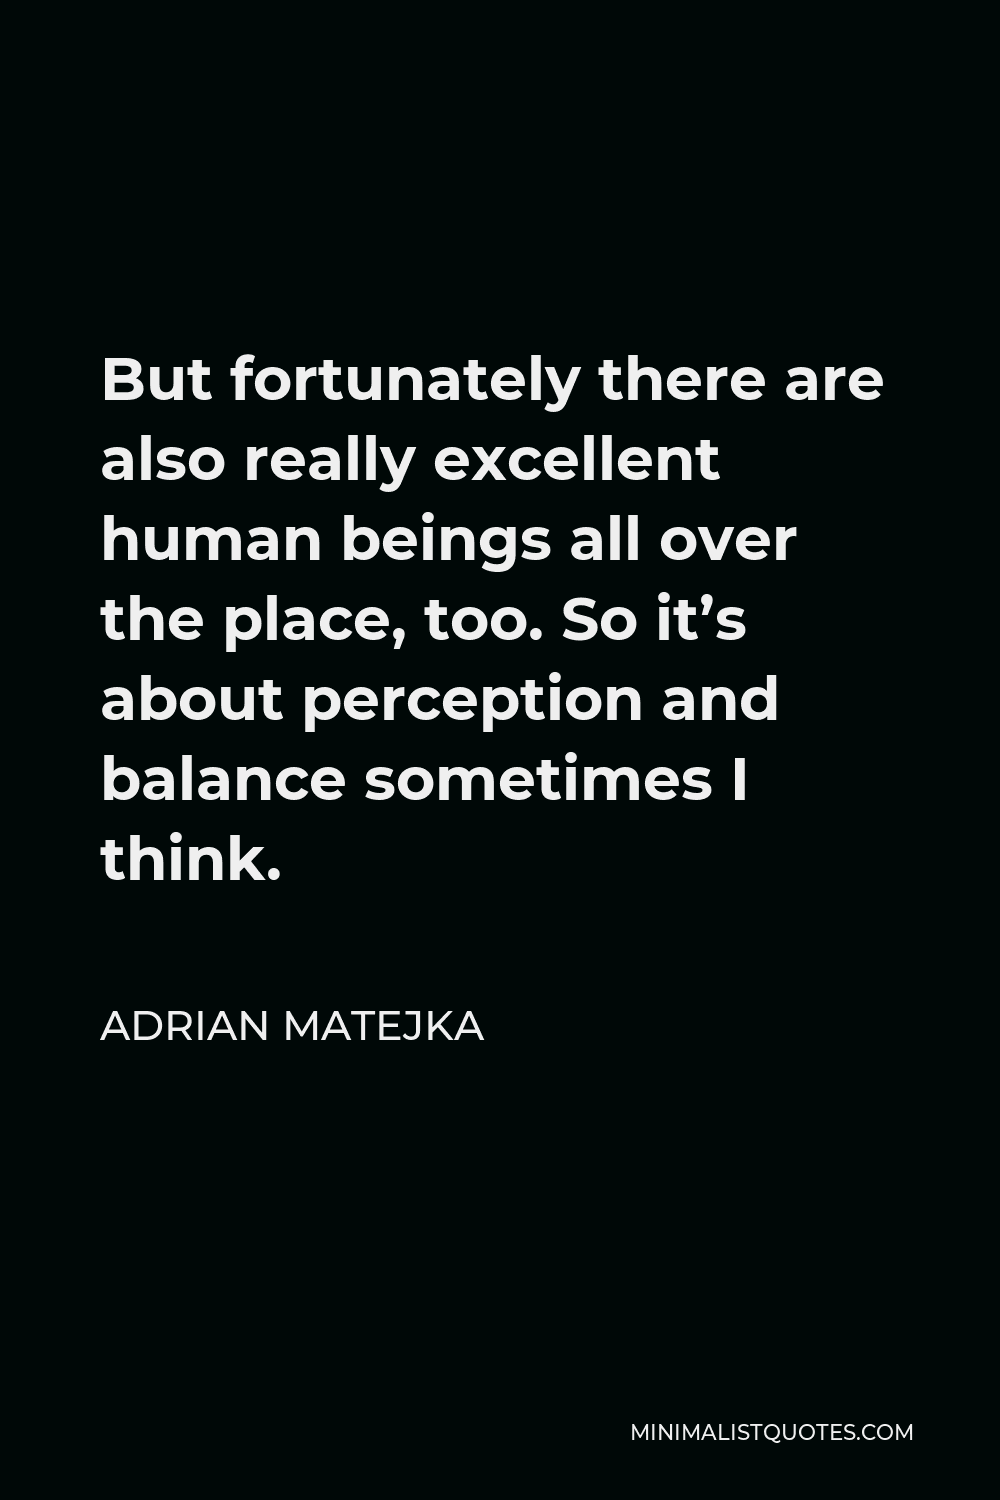 Adrian Matejka Quote - But fortunately there are also really excellent human beings all over the place, too. So it’s about perception and balance sometimes I think.